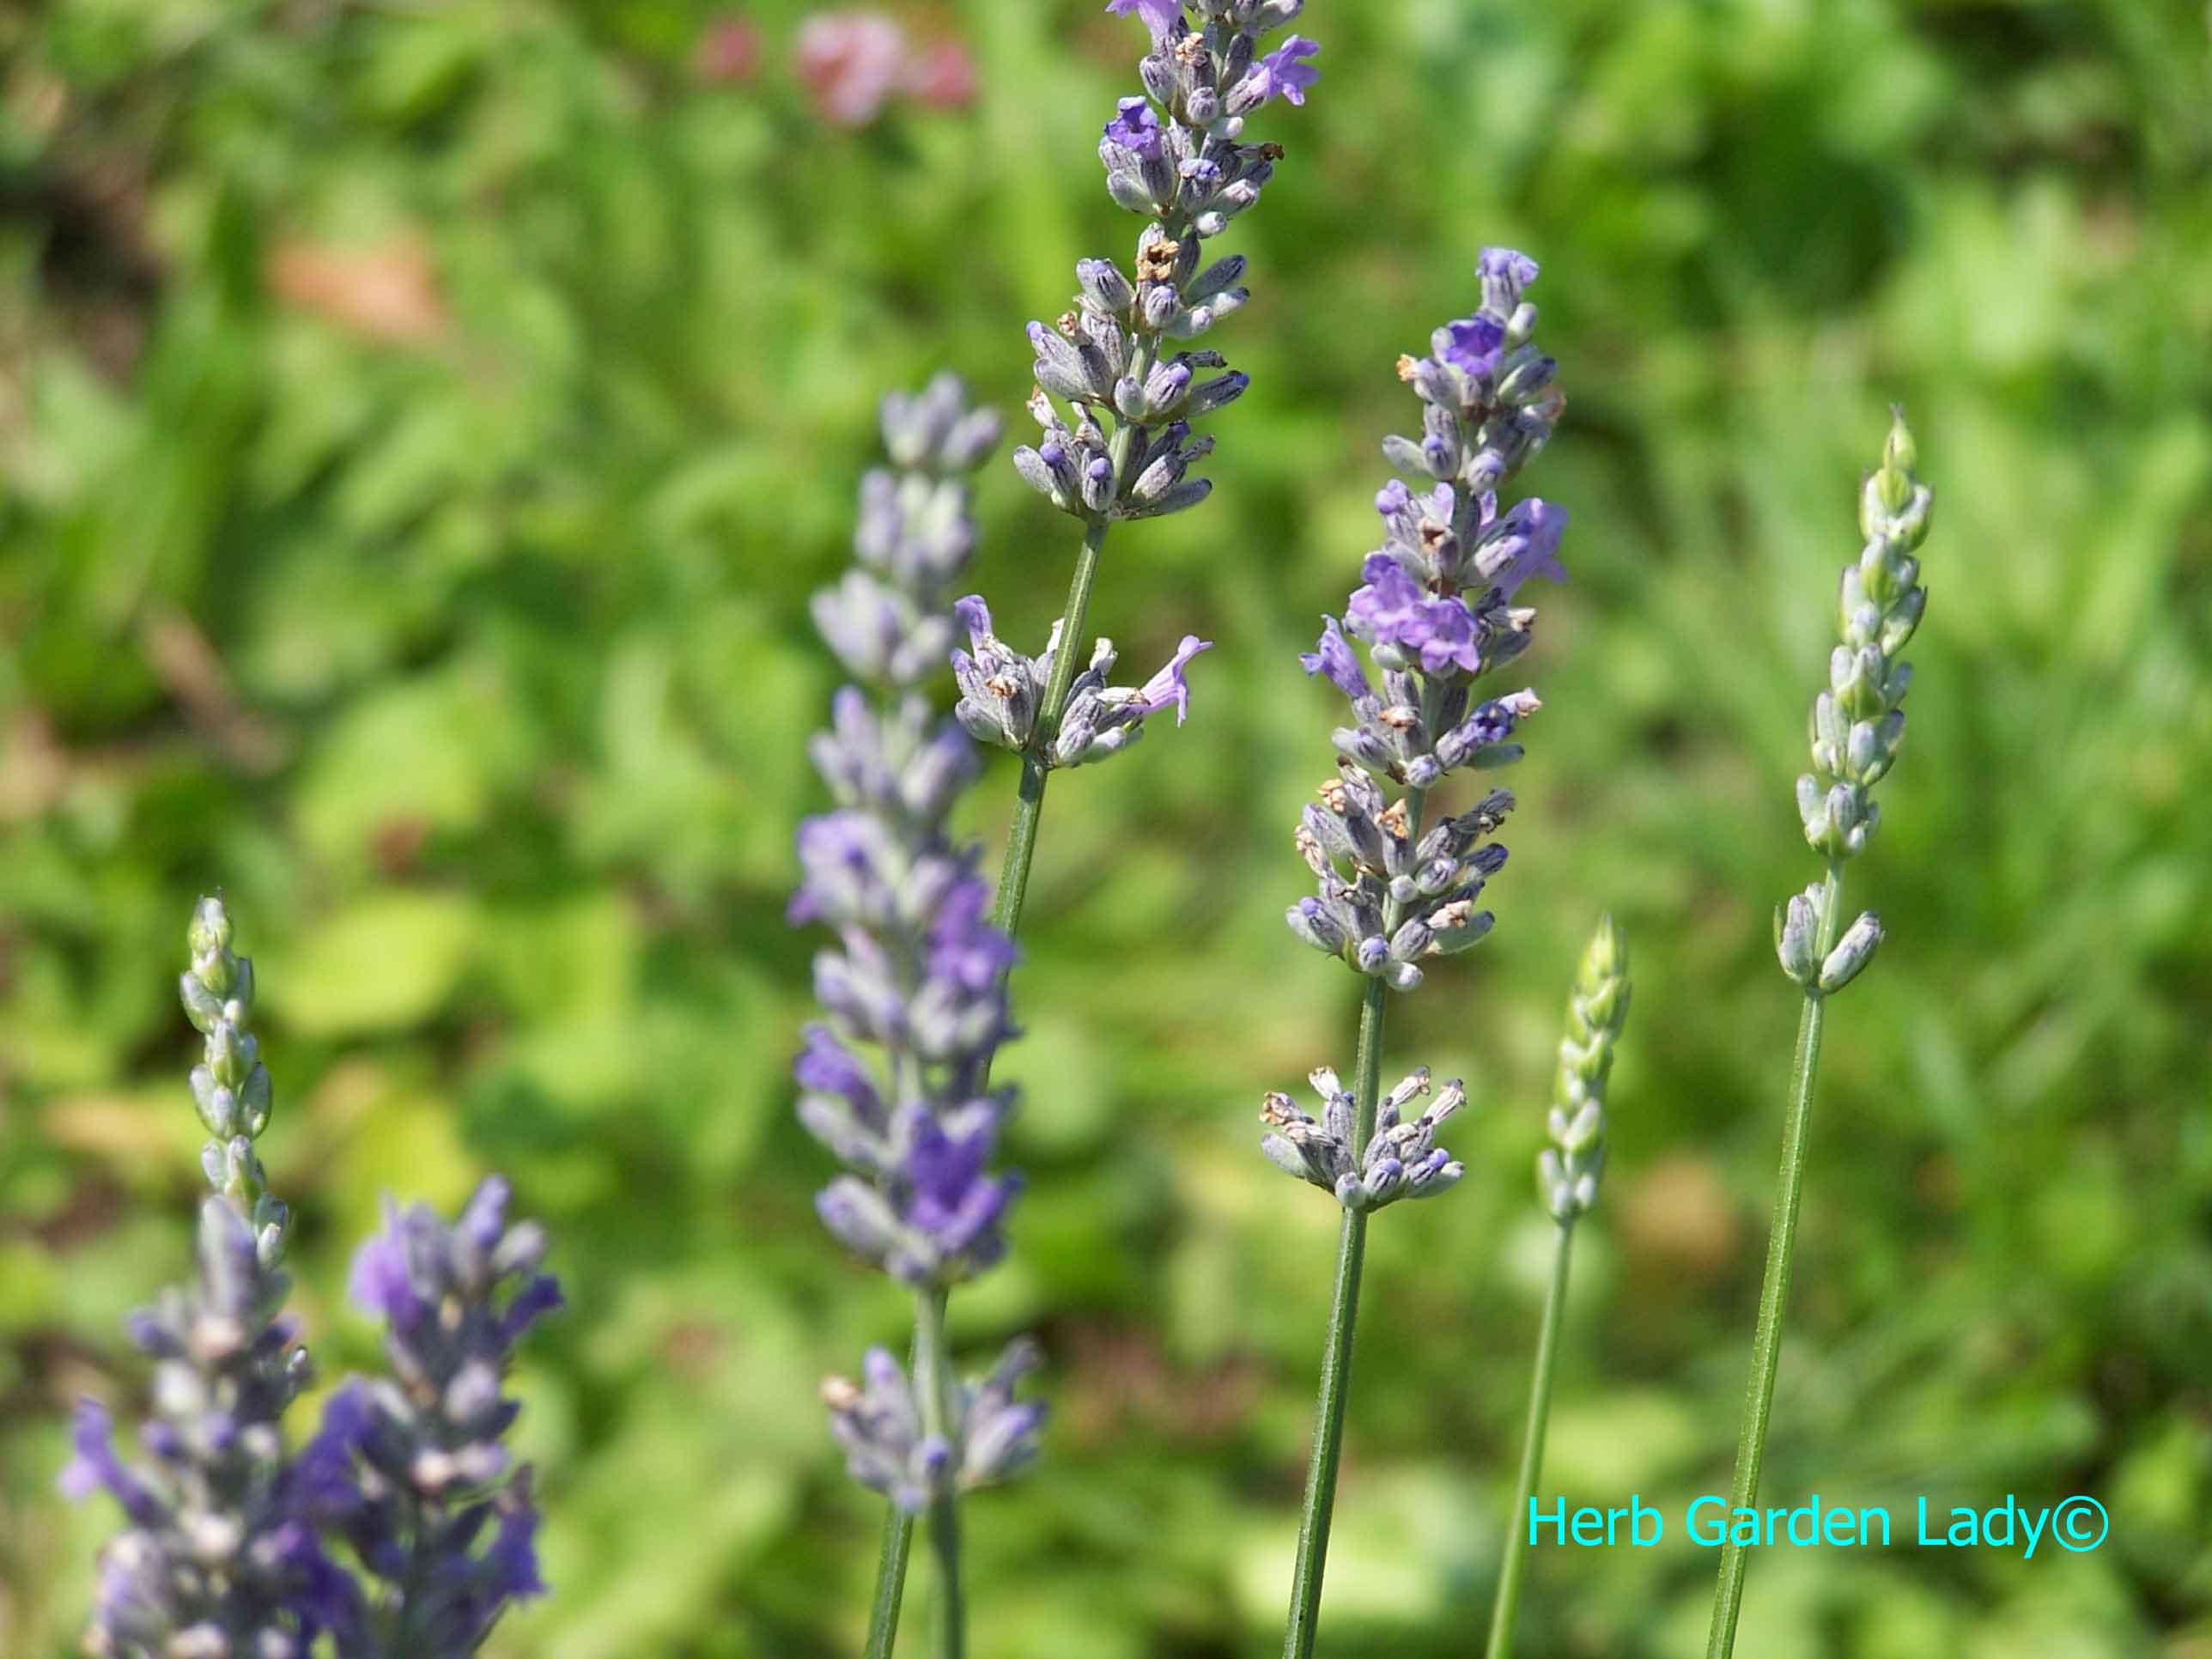 Lavender is great for making lavender wreaths and crafty items.